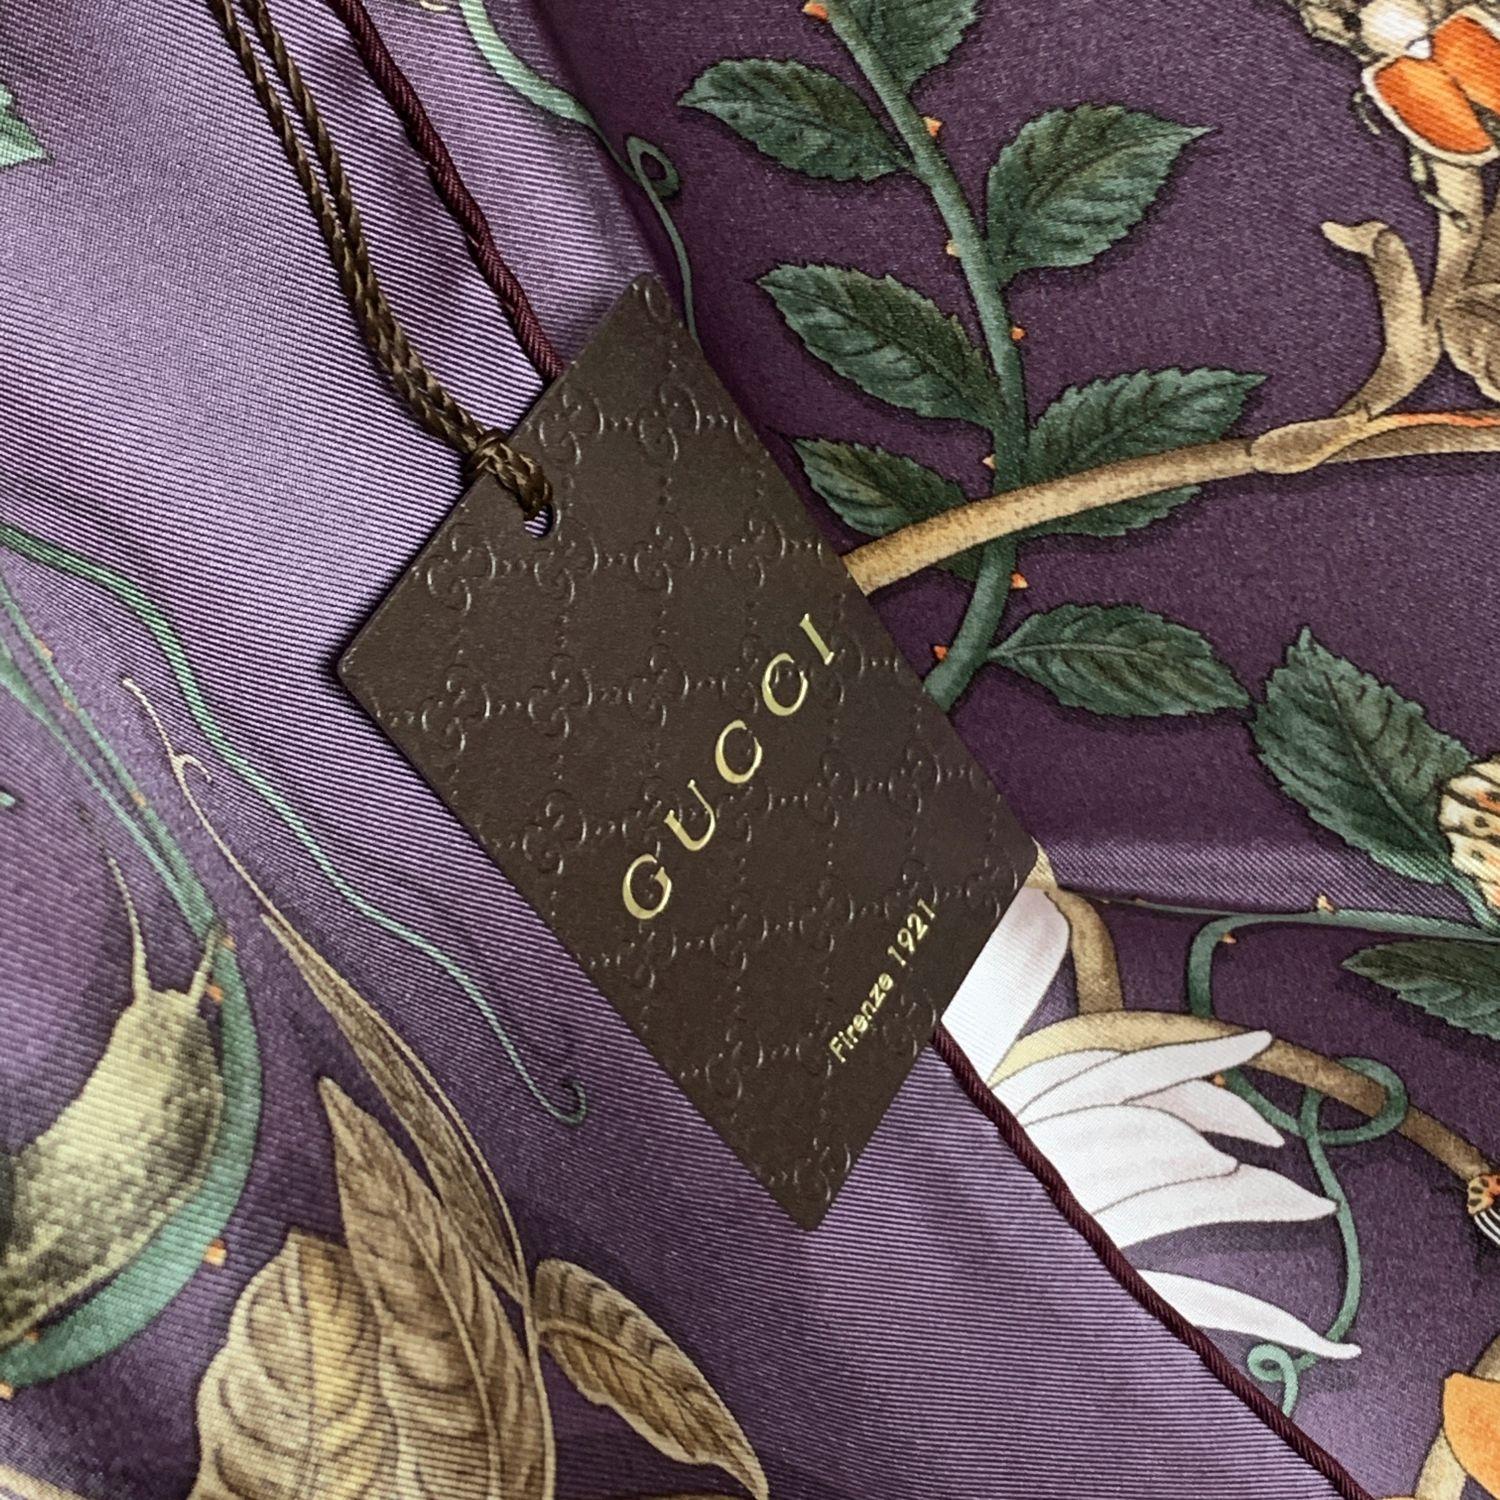 Gucci Violet Silk Flower Webby Square Scarf 90 x 90 Never Worn 1